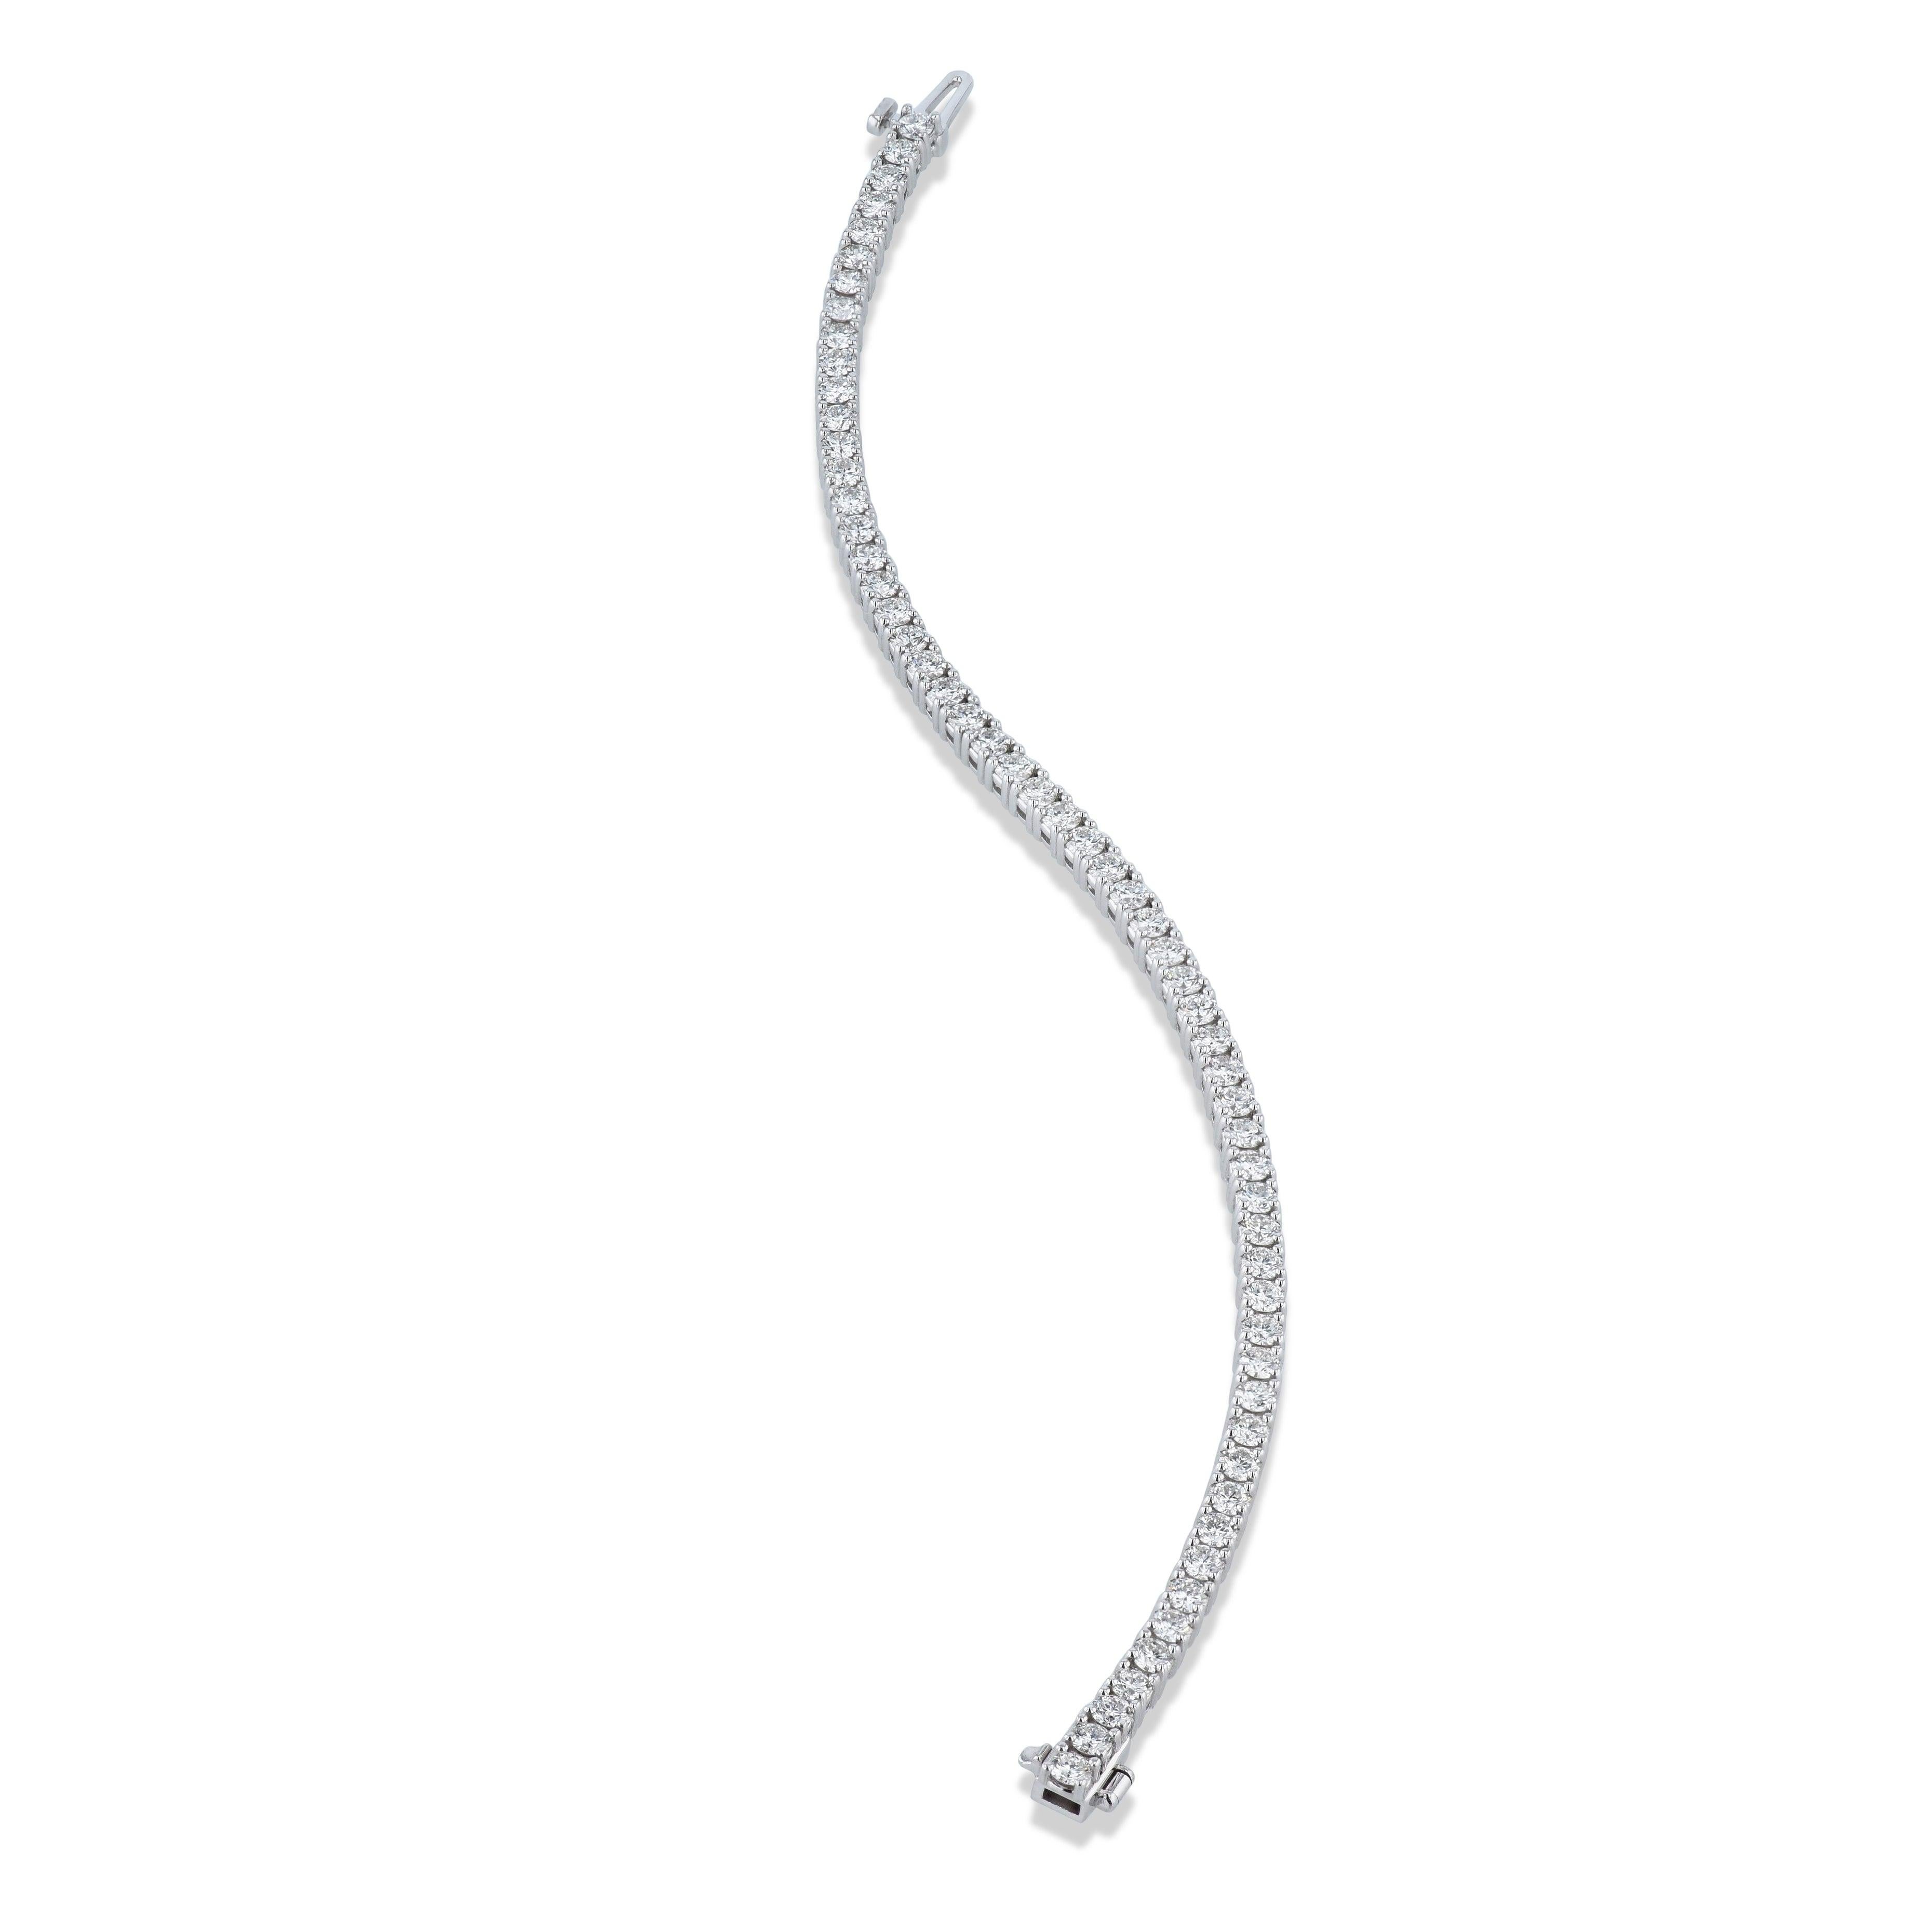 This gorgeous 18kt White Gold Tennis Bracelet showcases 58 Round Brilliant Cut Diamonds that sparkle! Expertly crafted with a 4-prong setting and handmade by H&H Jewels, it's a breathtaking beauty!
Diamond White Gold Tennis Bracelet
18kt White